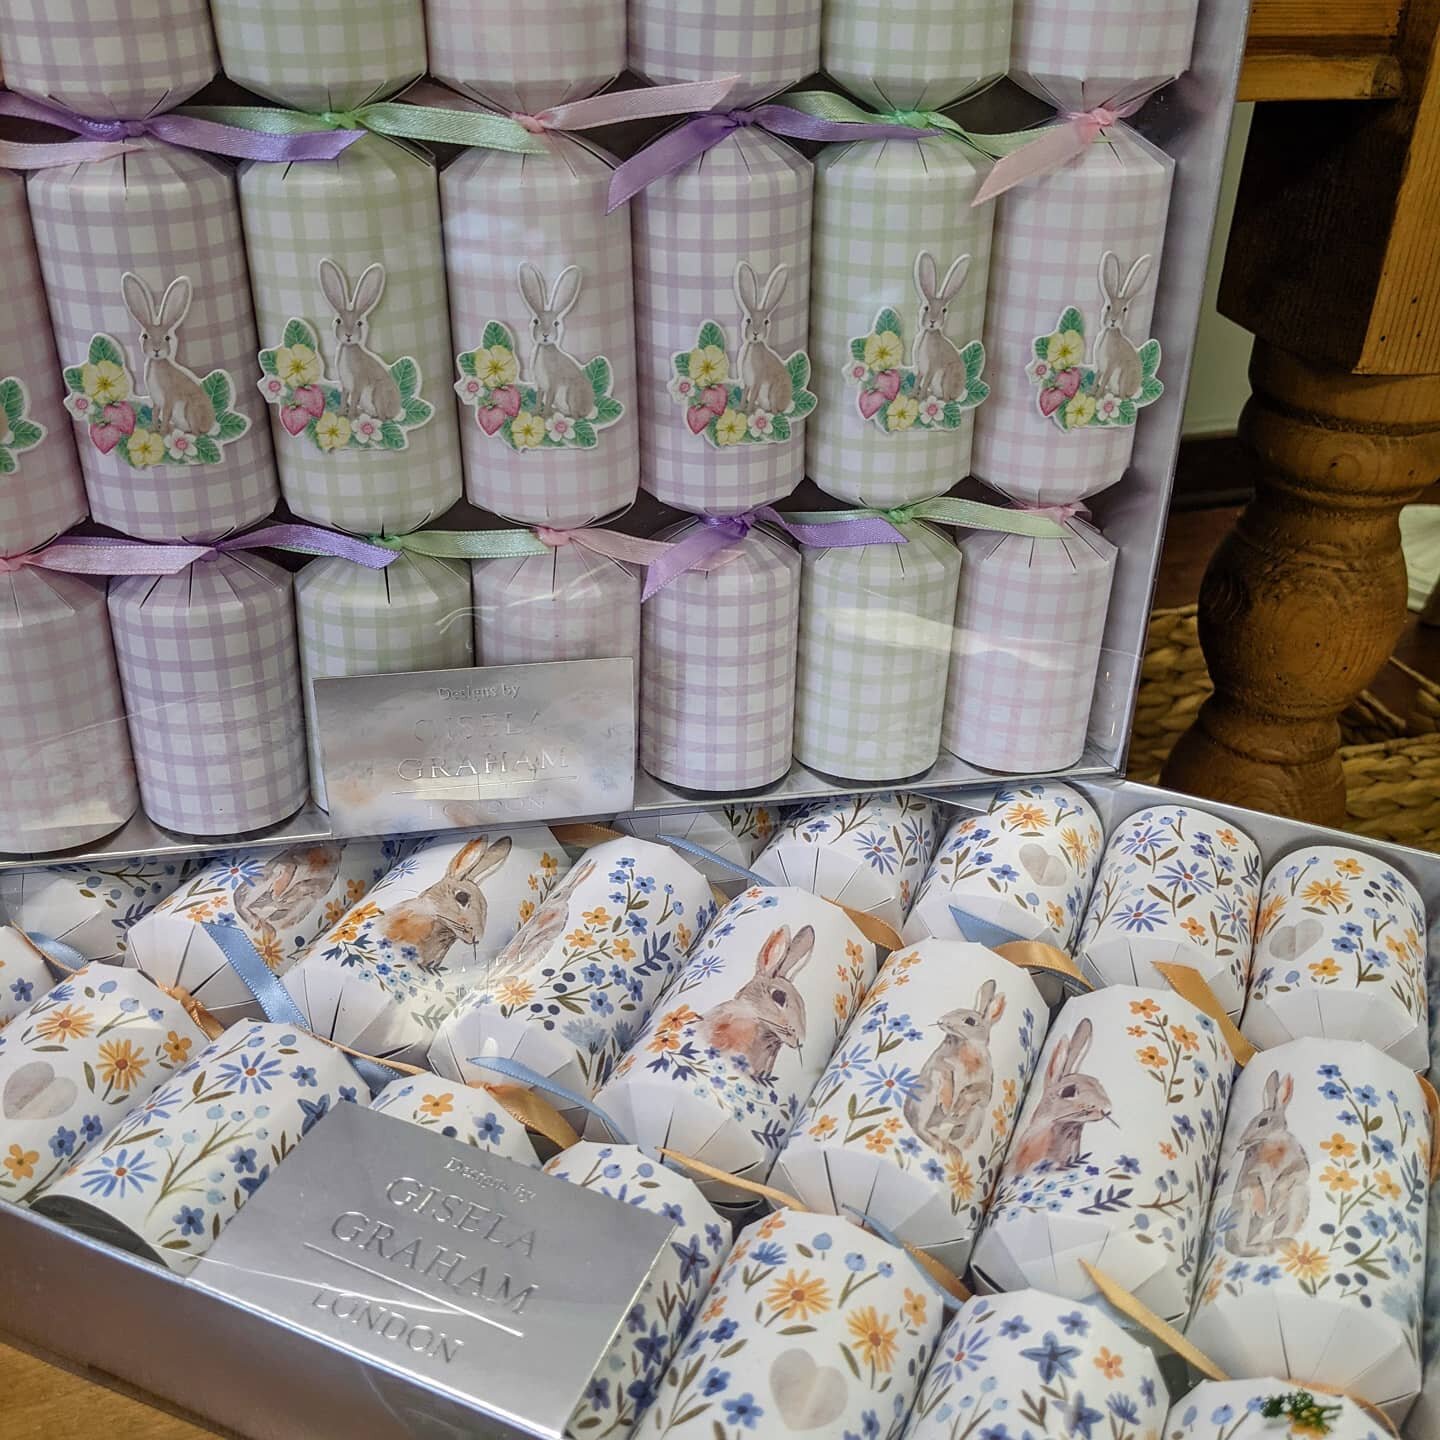 You've heard of crackers at Christmas, but how cute are these Easter crackers?  They would be so fun on your Easter table!
.
.
.
.

#easterdecor #easter #easterbunny #winterparkfl #shopwinterpark #christiangifts